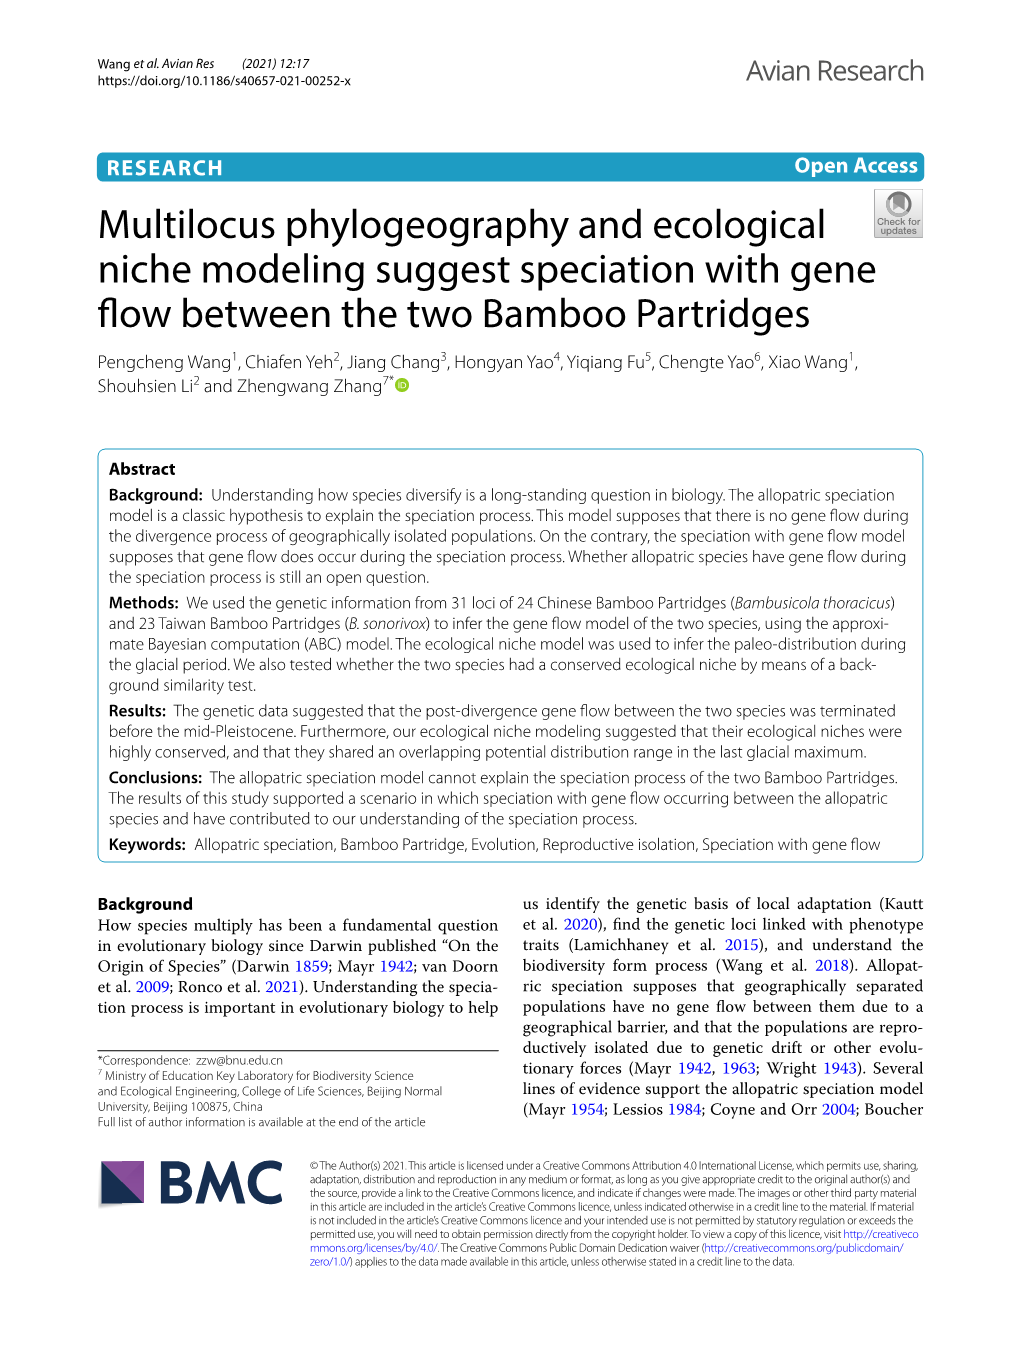 Multilocus Phylogeography and Ecological Niche Modeling Suggest